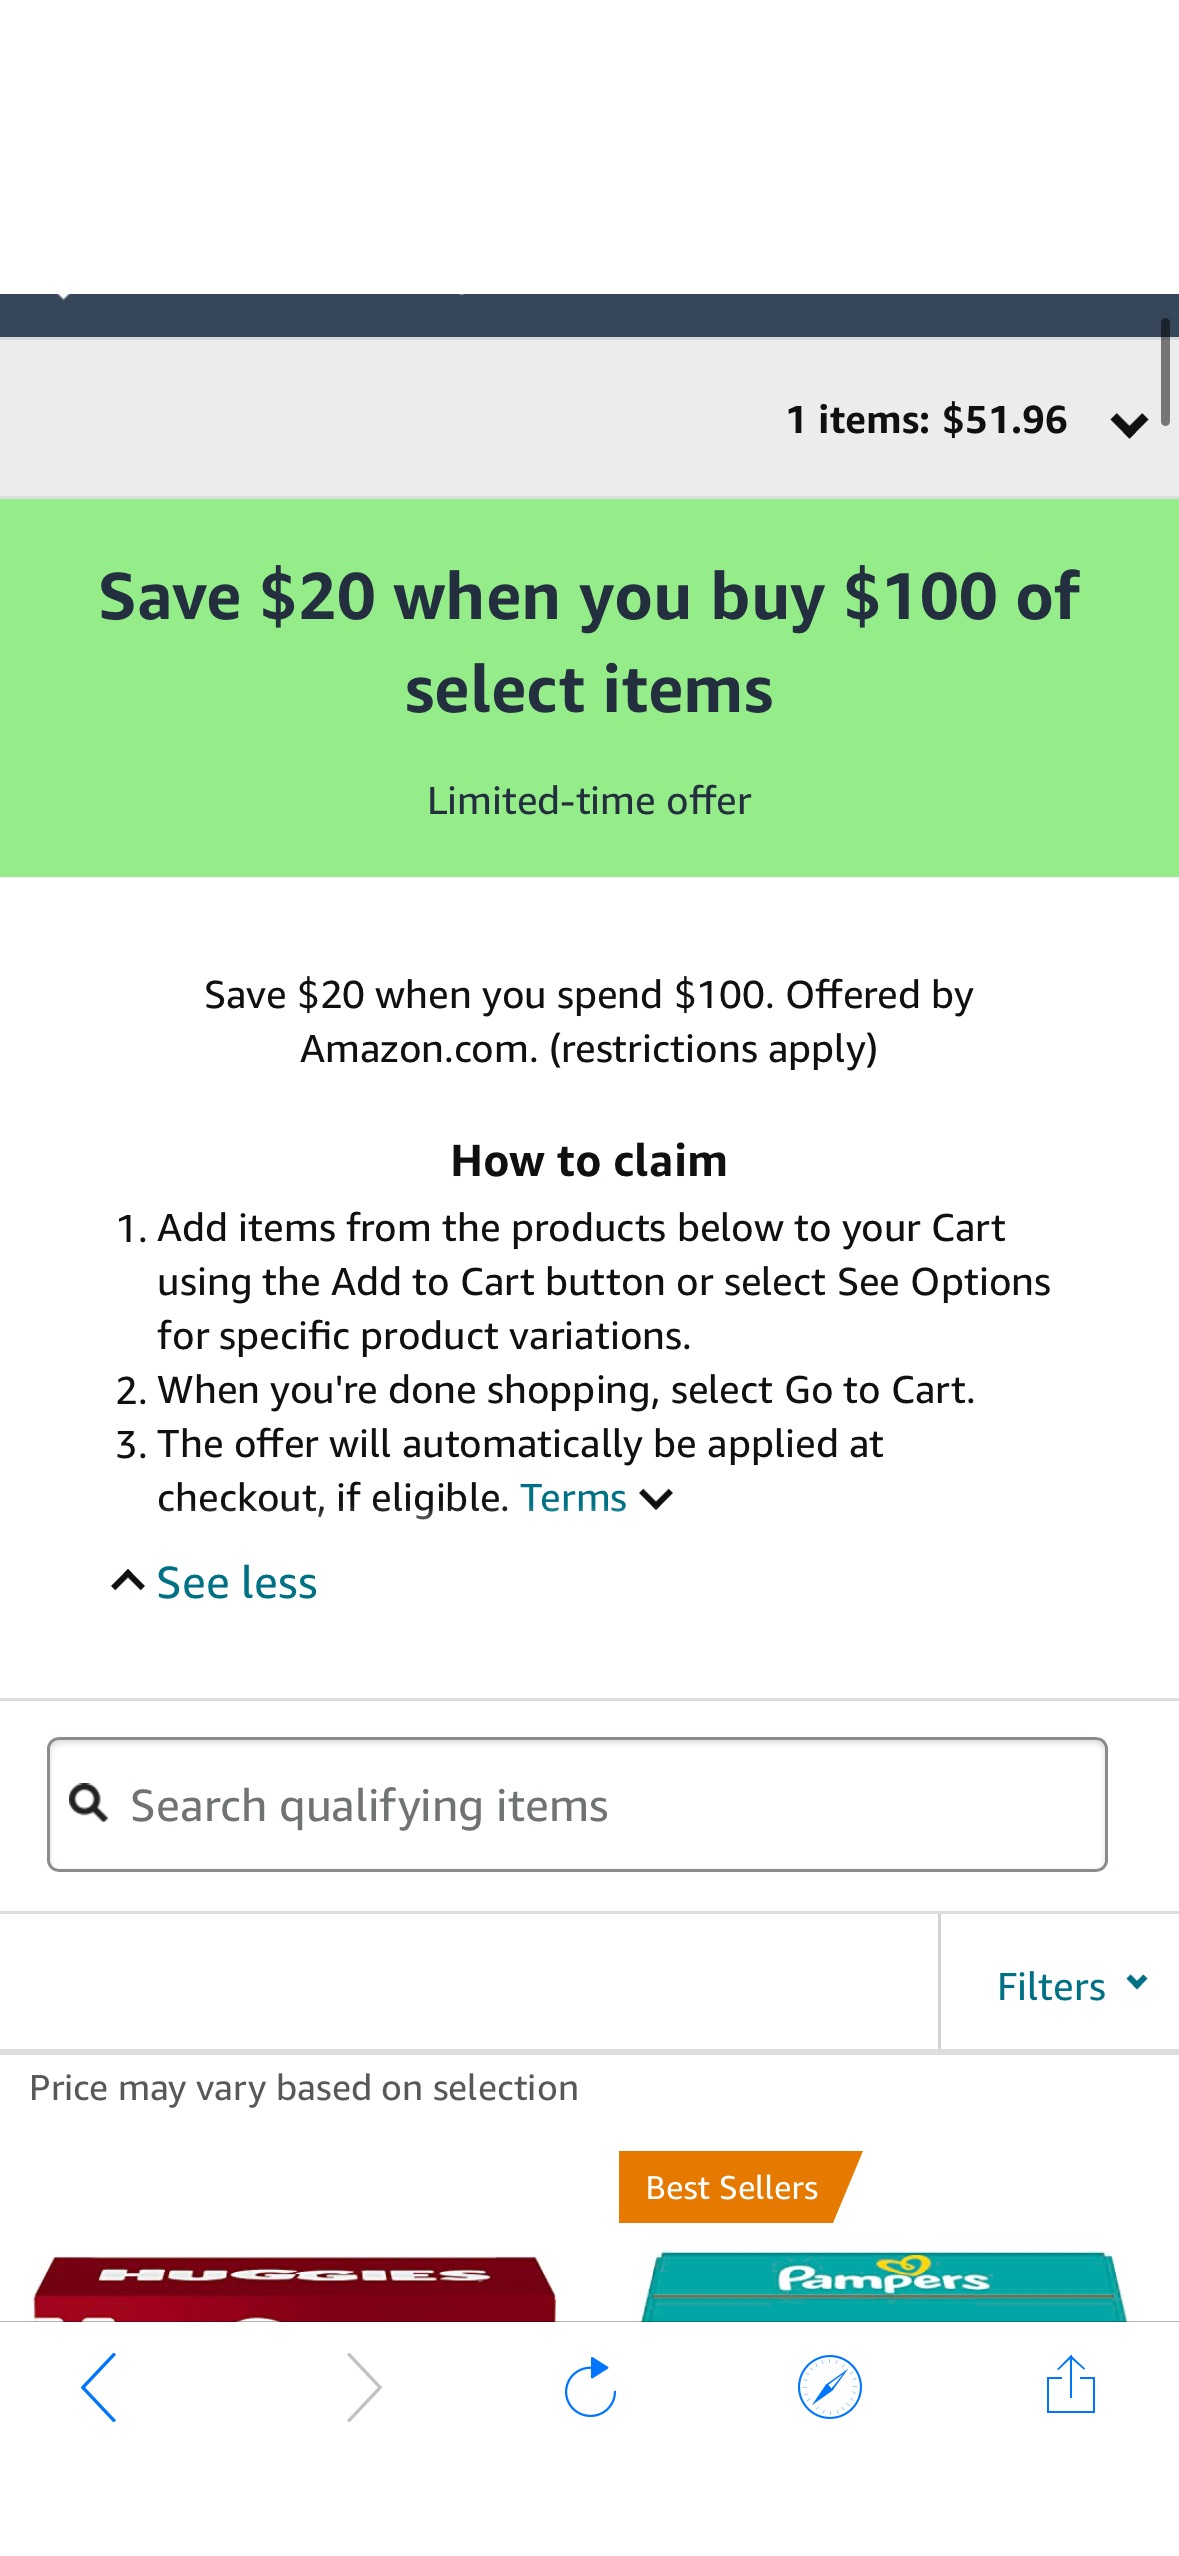 Amazon.com: Save $20 when you buy $100 of select items promotion尿不湿